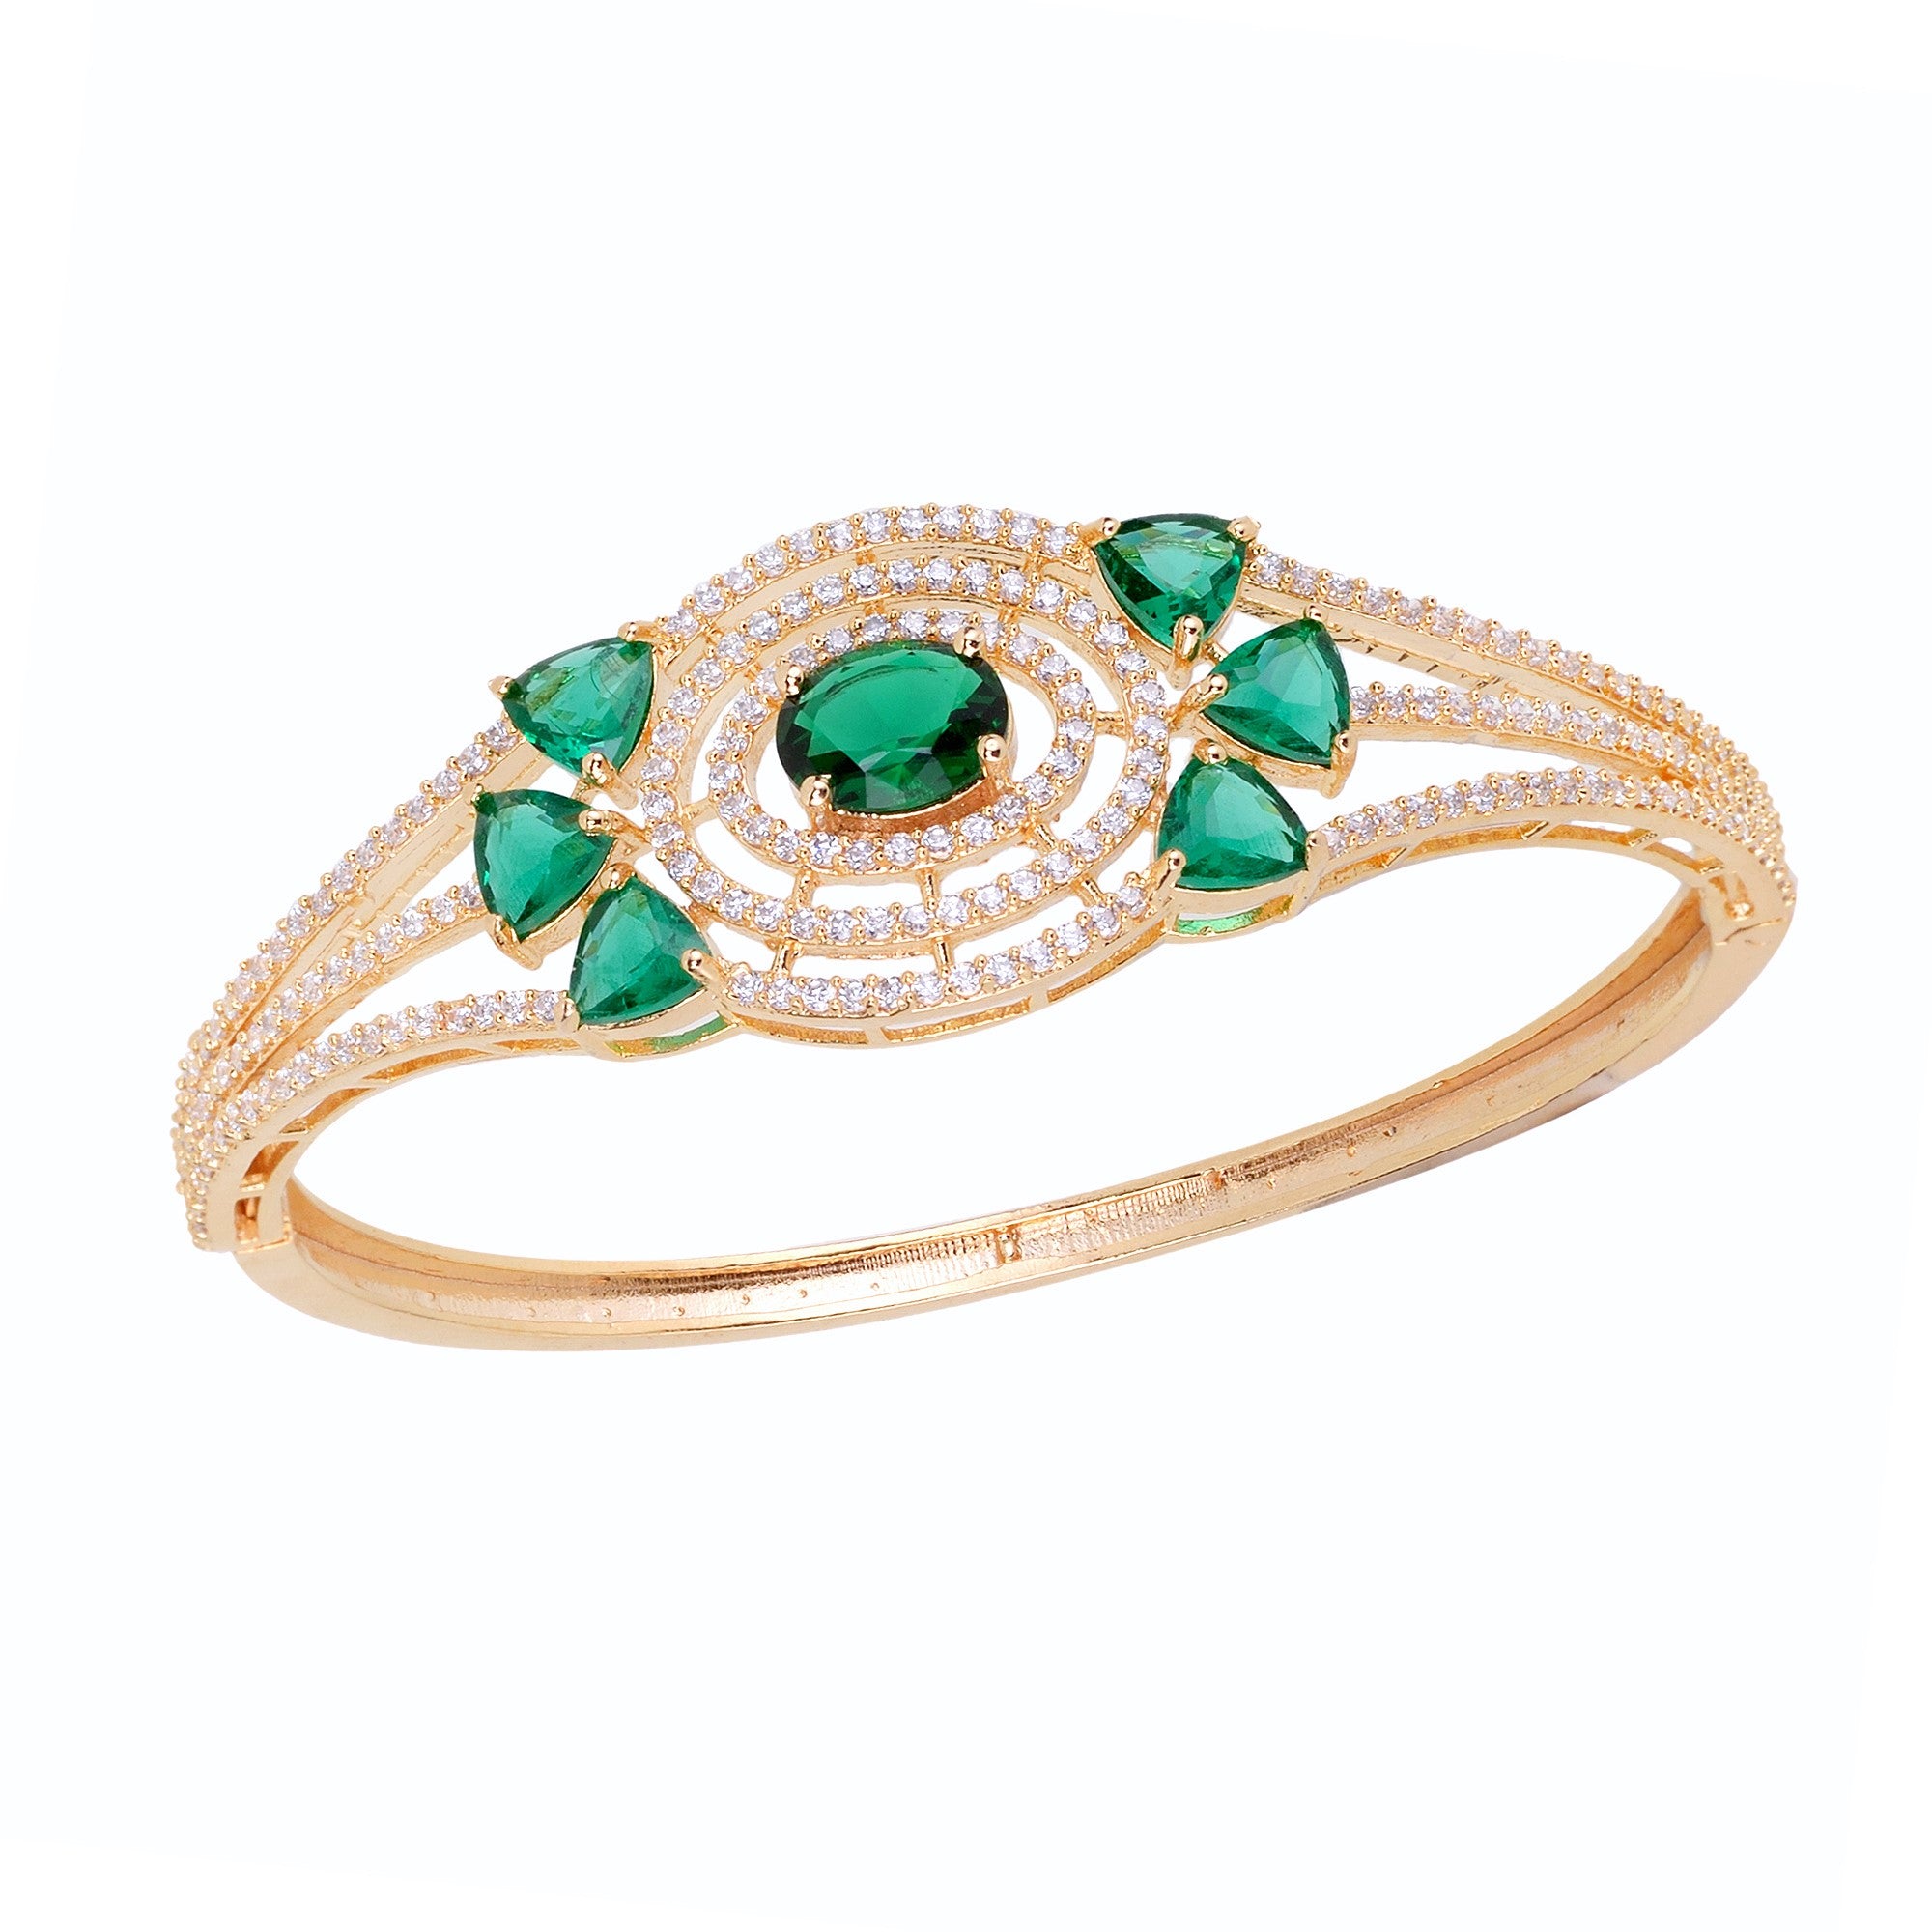 Gold Plated With Green American Diamond Studded Handcrafted Designer Bracelet For Women And Girls - Saraf Rs Jewellery